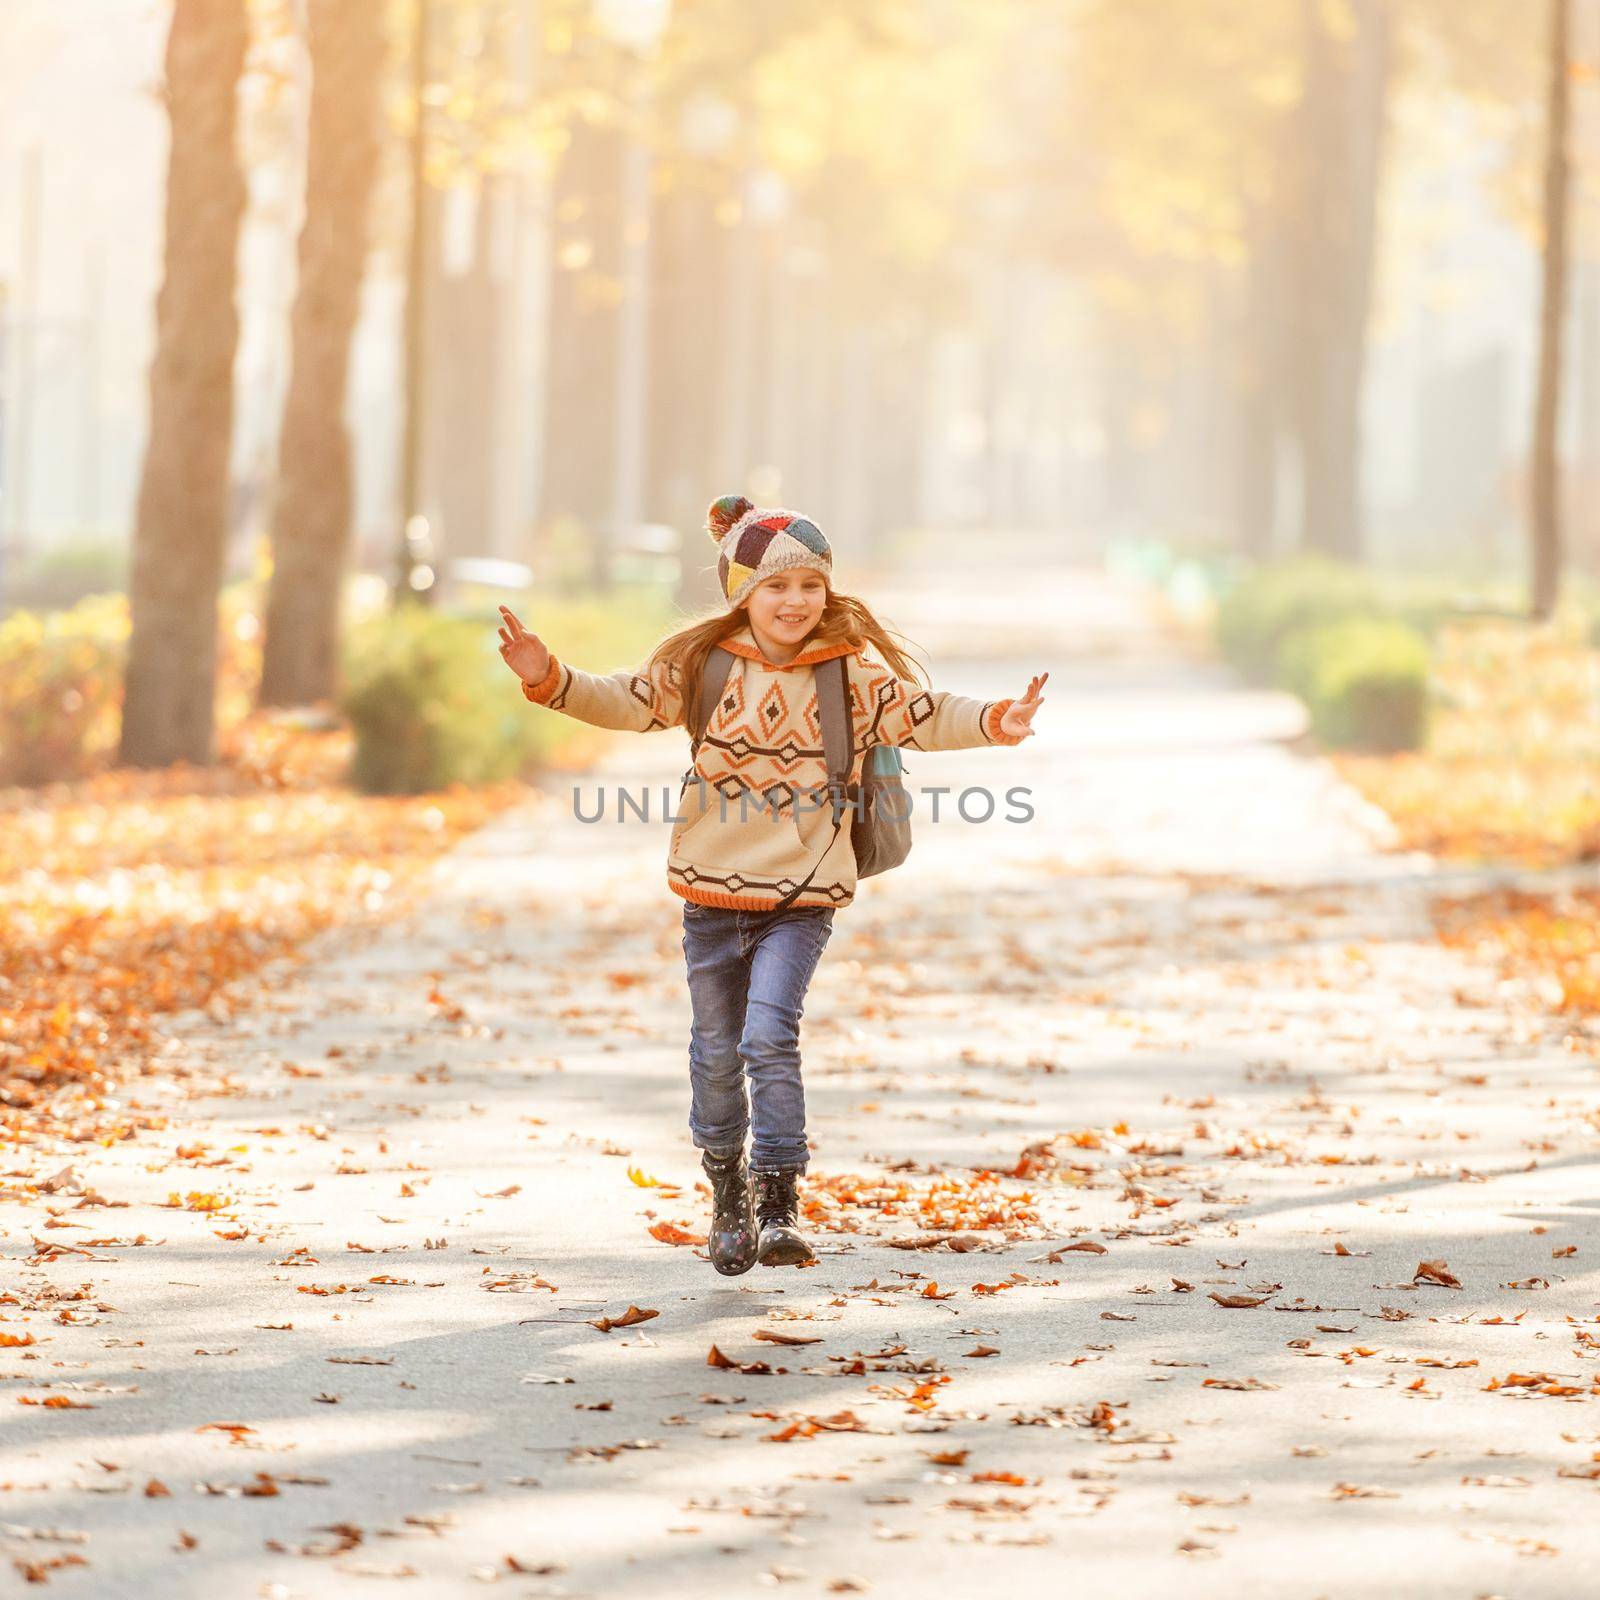 Smiling schoolchild after lessons in autumn park